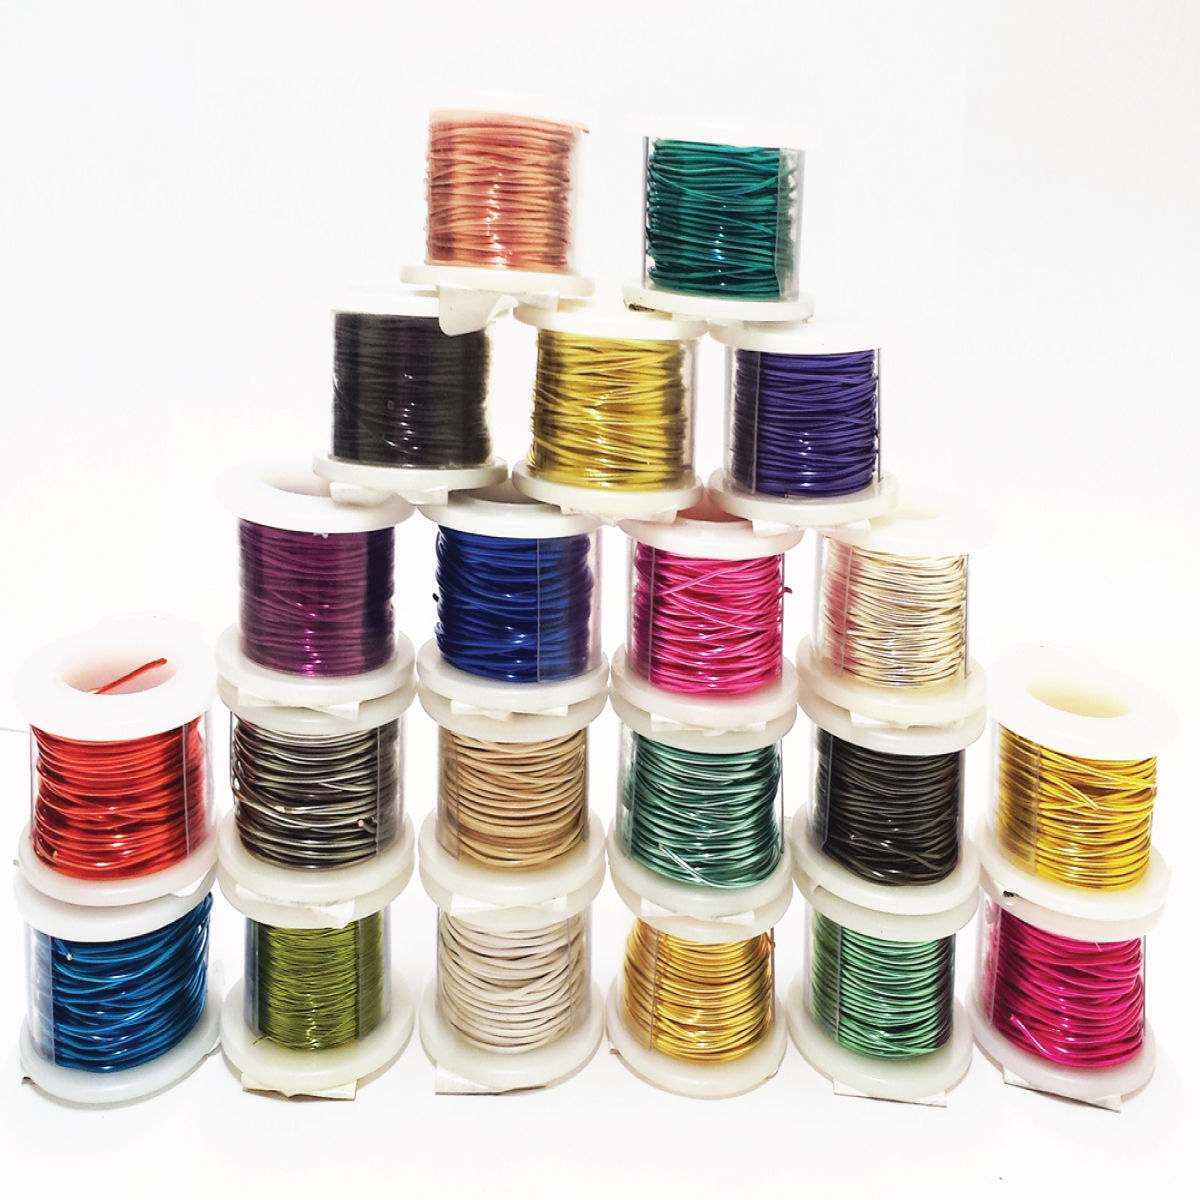 Click to Save on Colored Copper Wire with a Silver Layer for Brightness